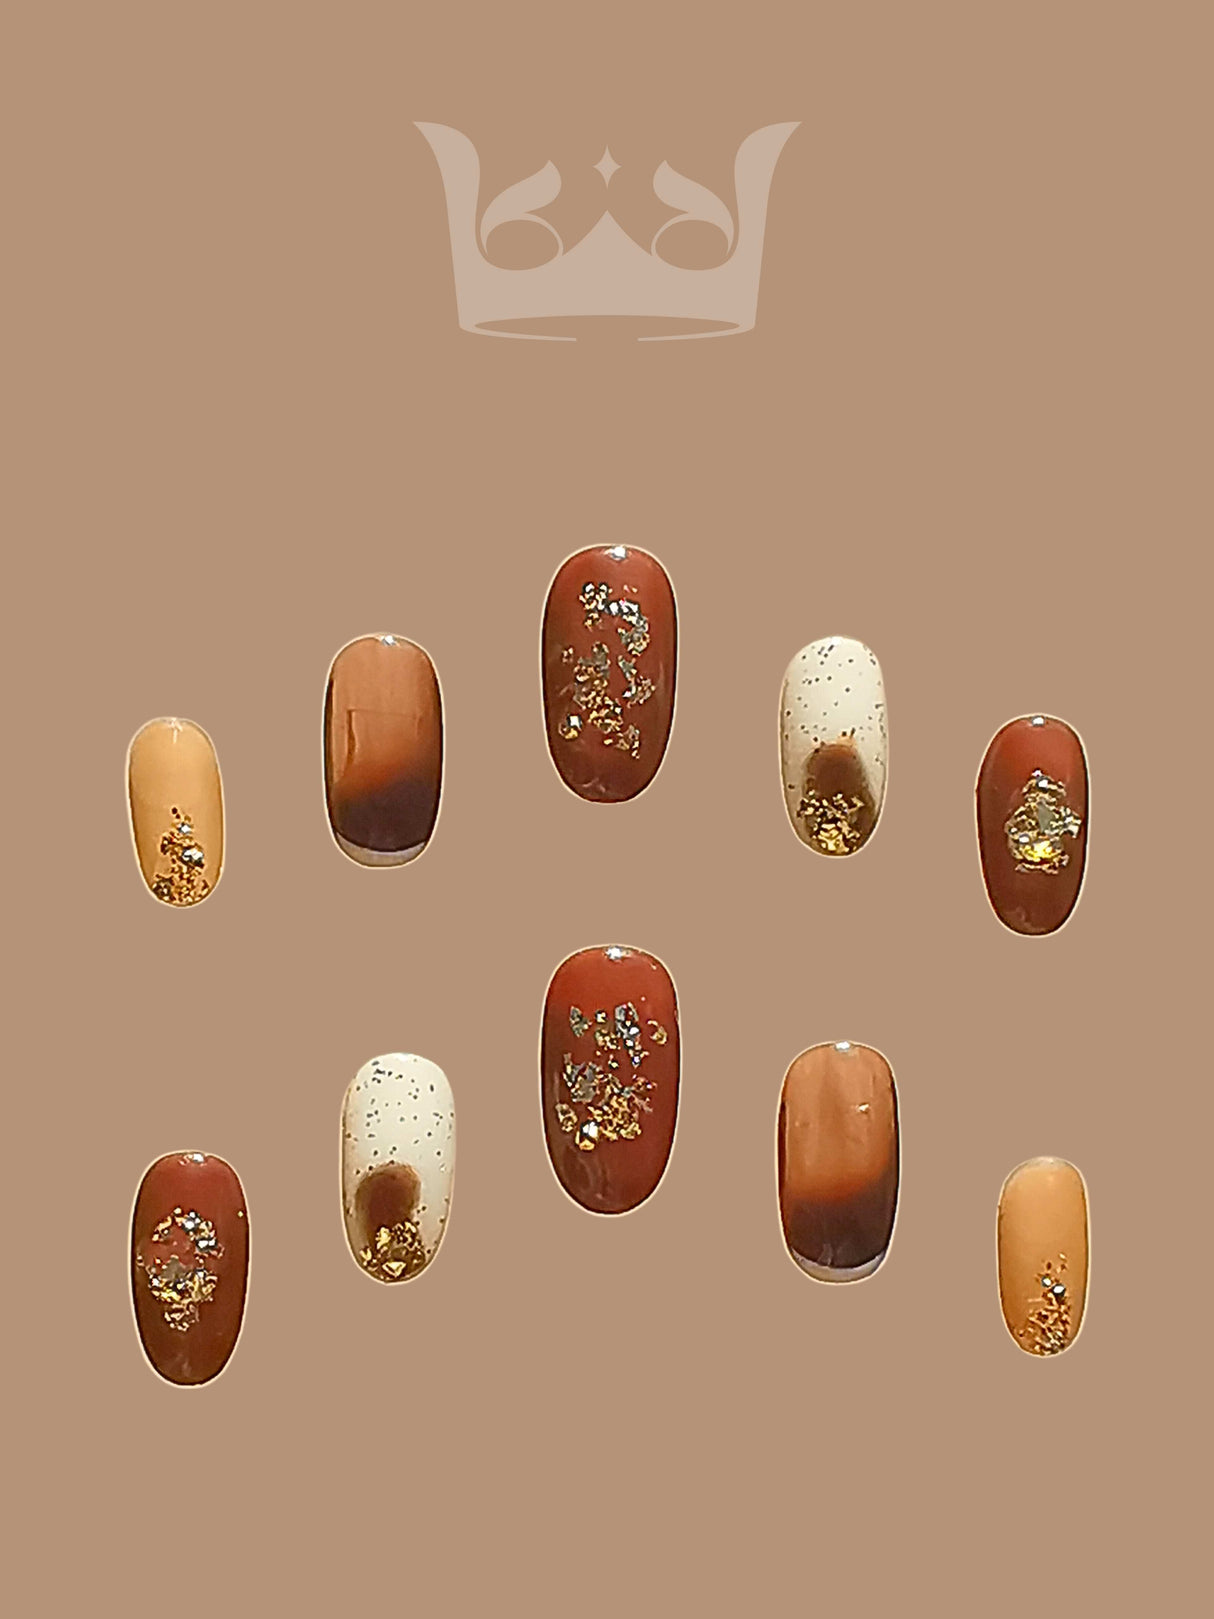 These press-on nails offer a fancy look with warm, earthy tones and gold accents, suitable for everyday wear or formal events.